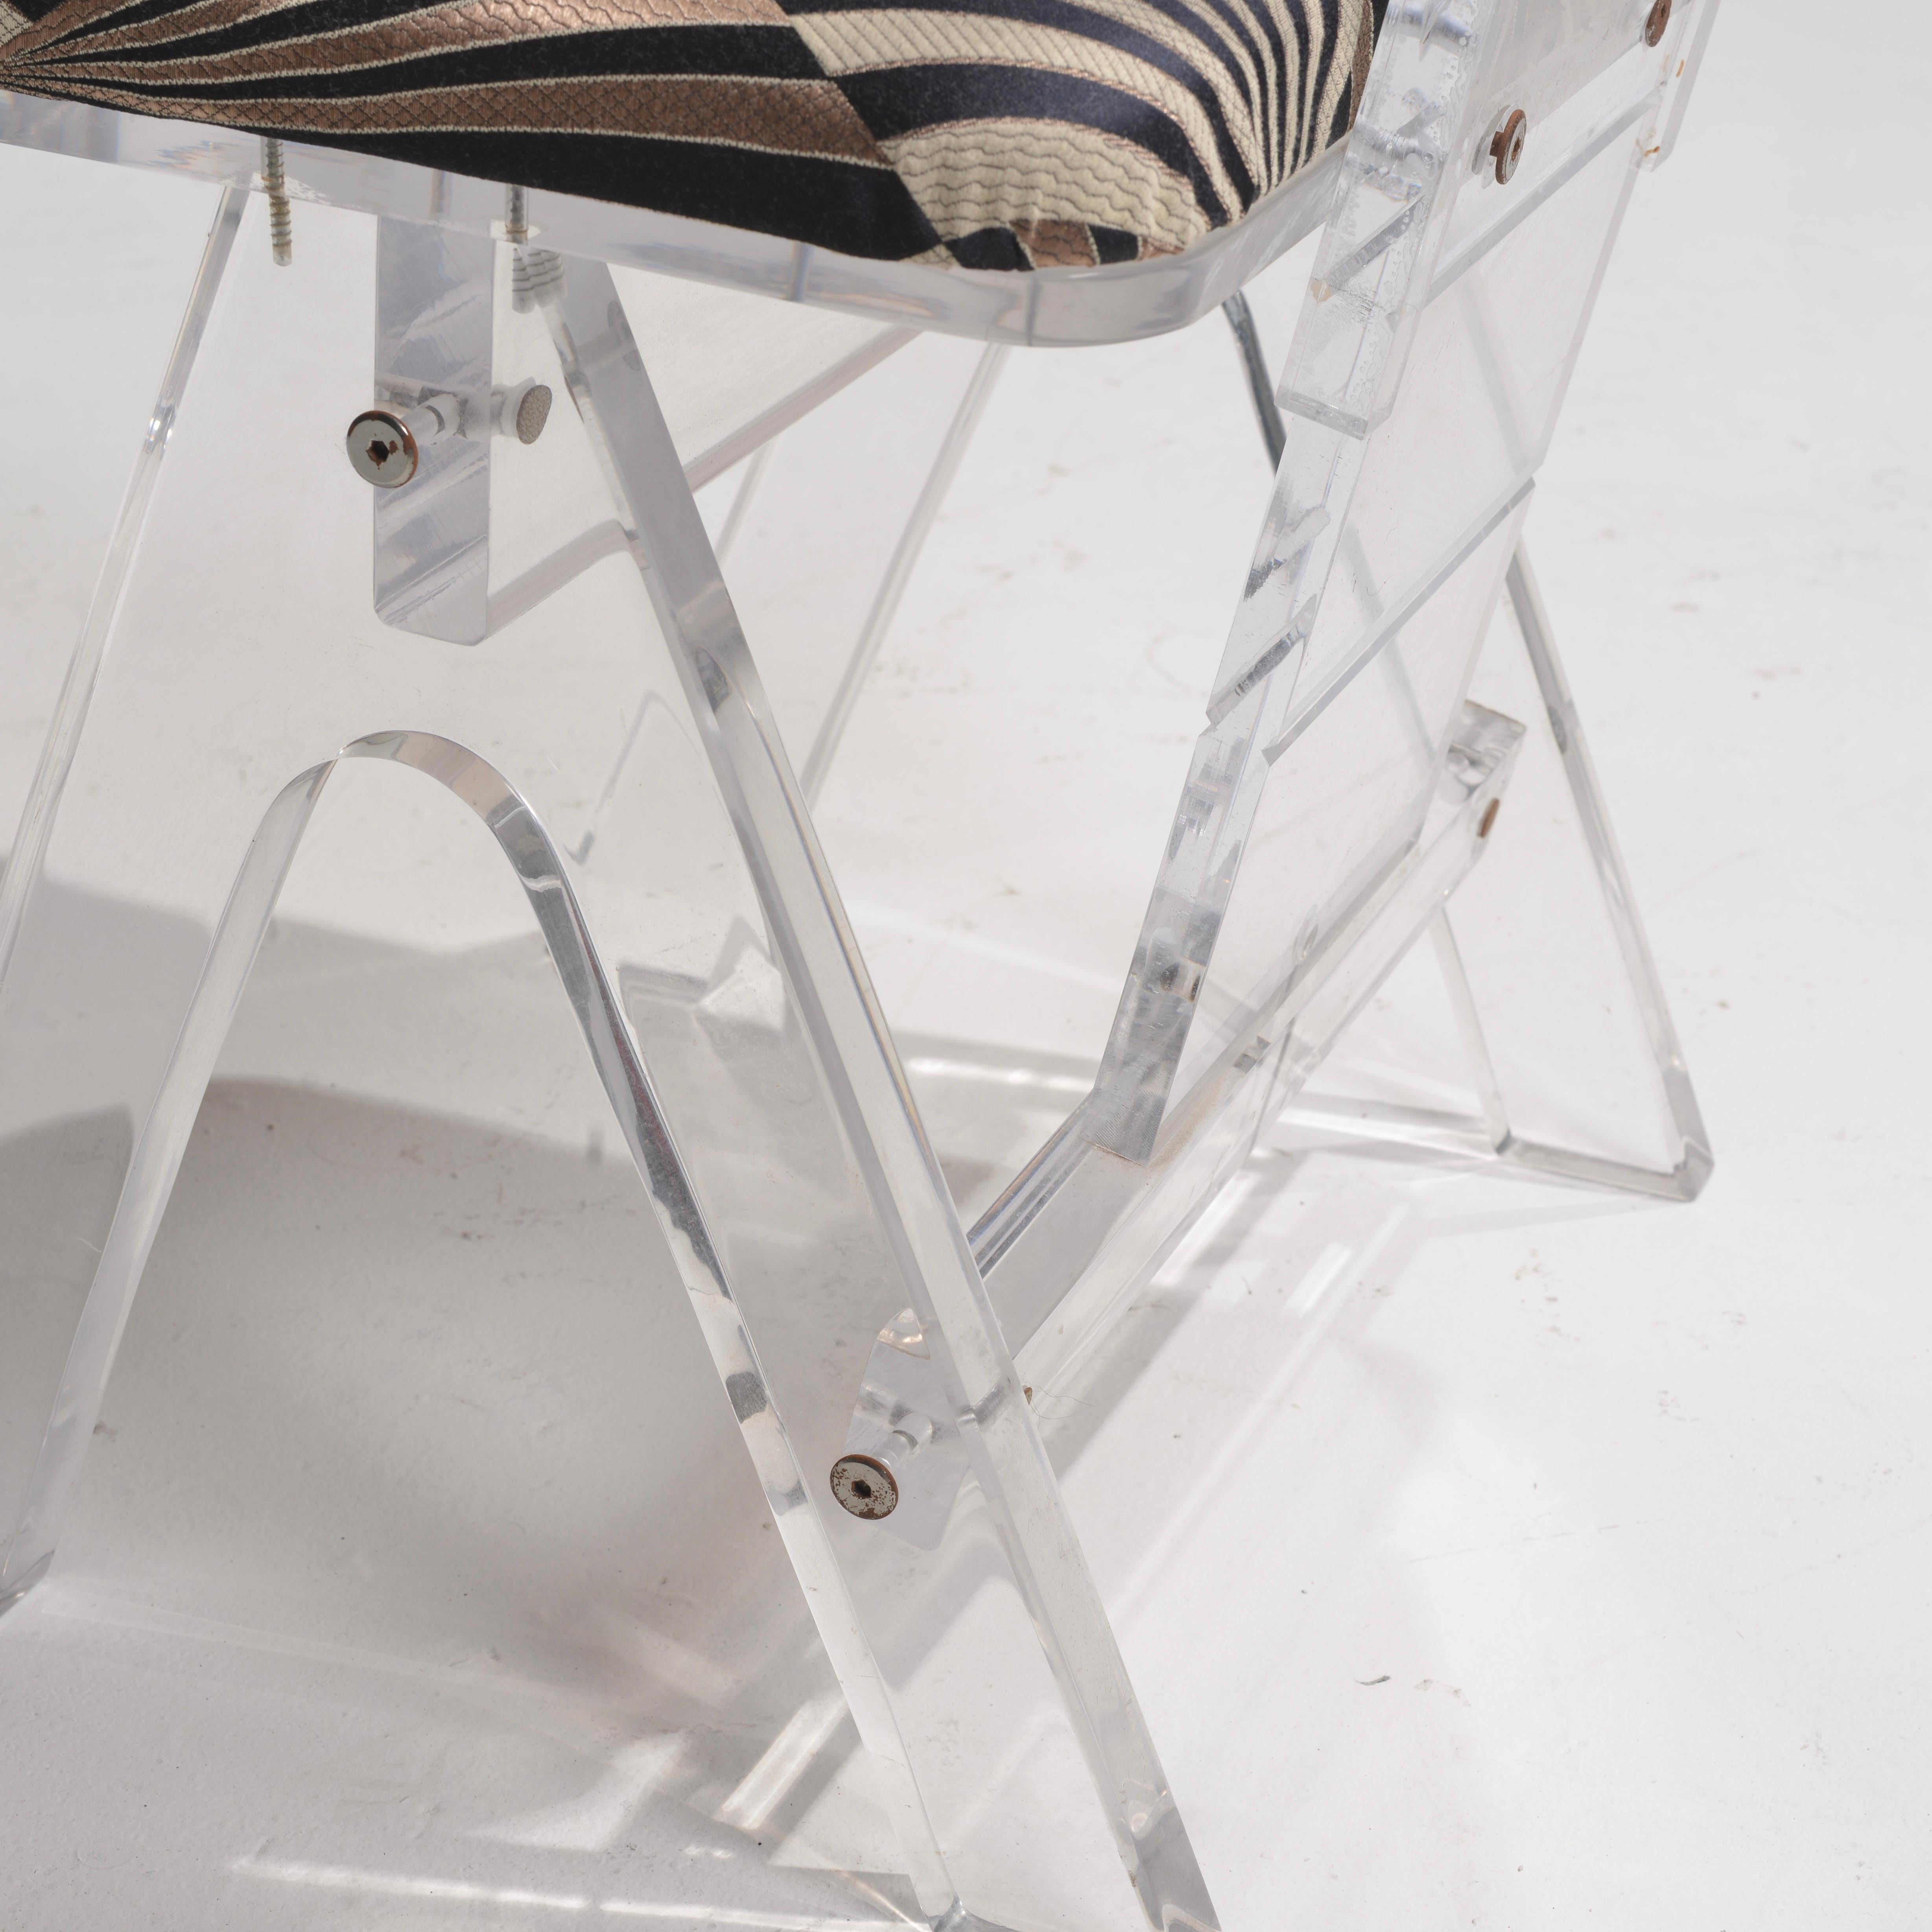 Mid-20th Century Set of 6 Lucite Chairs by Herb Rittz, c1970 For Sale